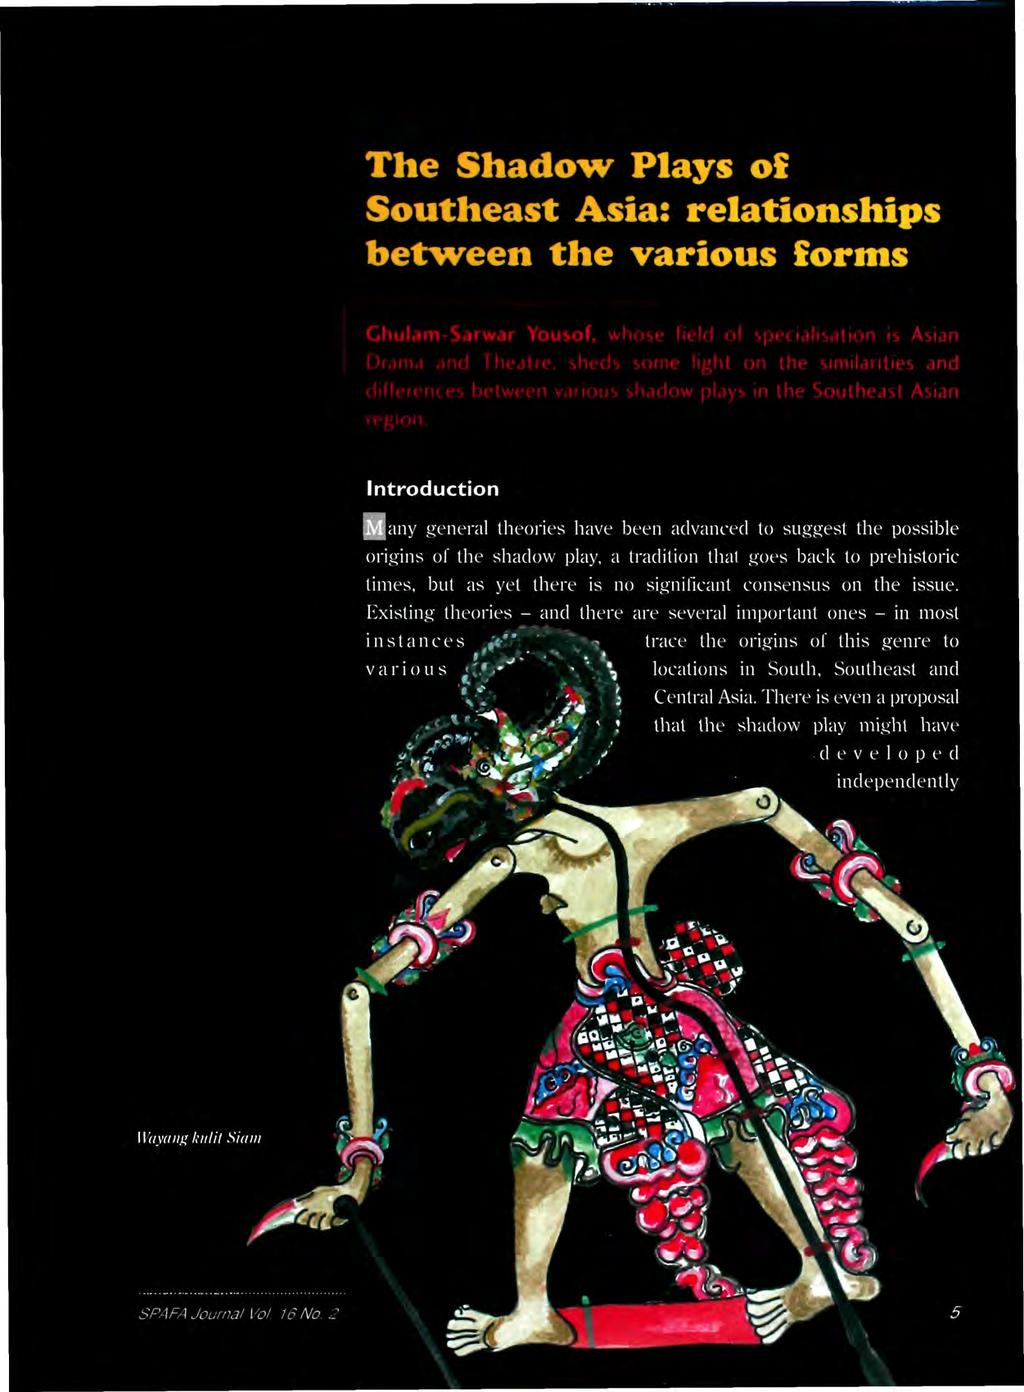 The Shadow Plays of Southeast Asia: relationships between the various forms Ghulam-Sarwar Yousof, wt diff< in.